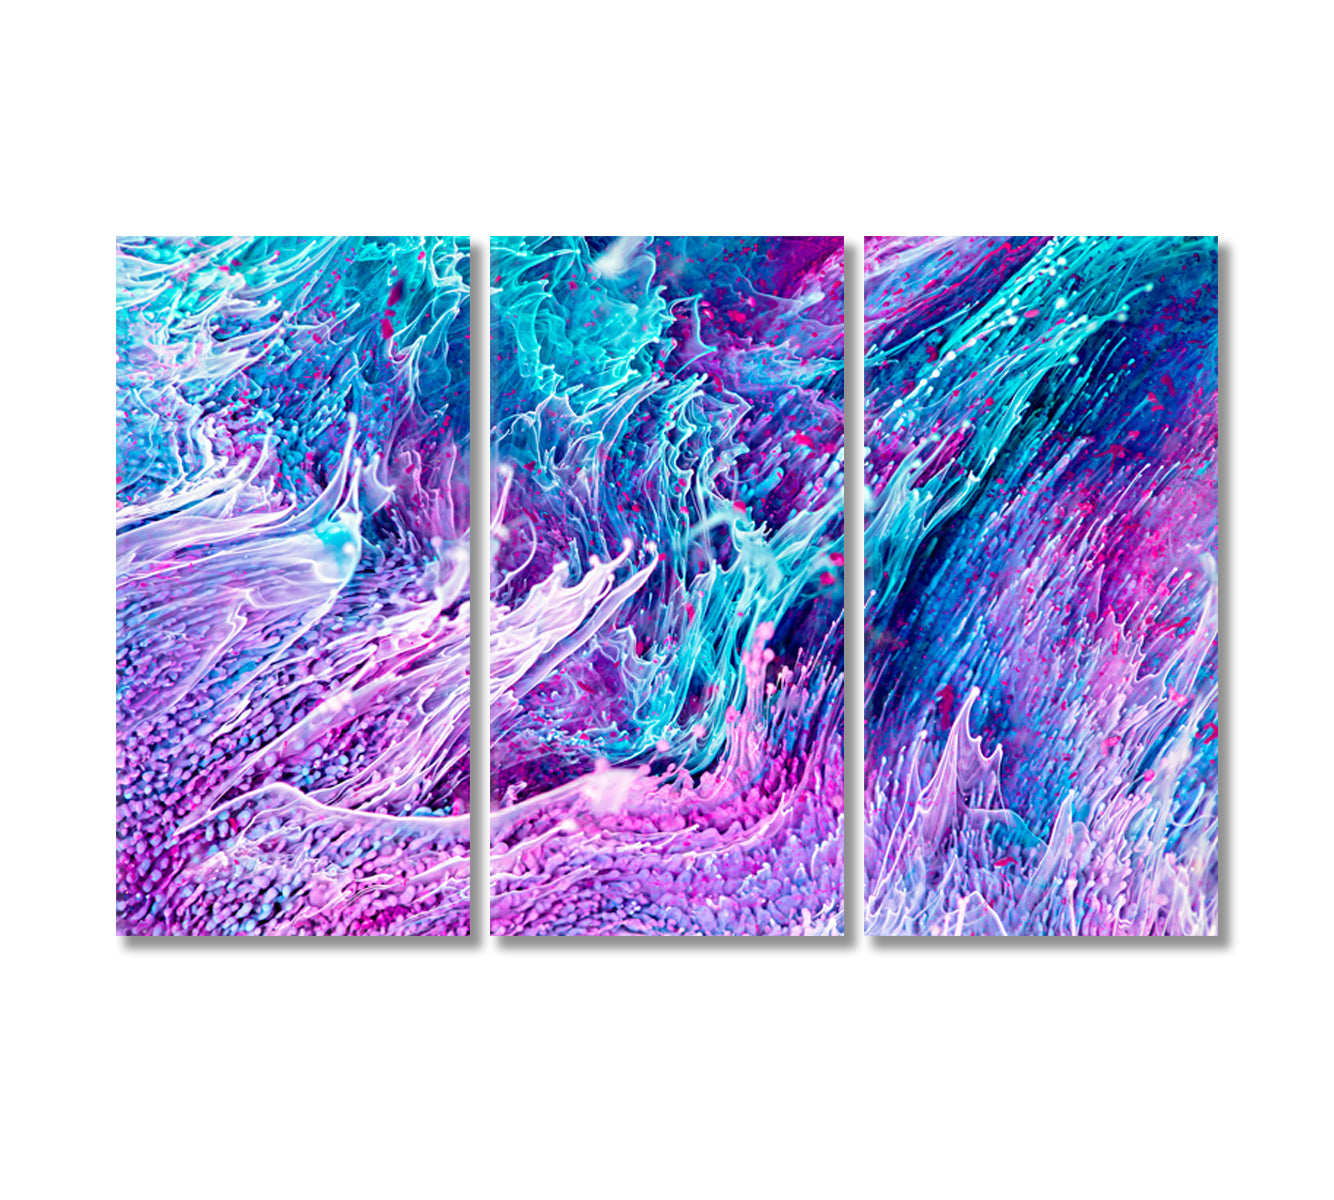 Beautiful Mixed Turquoise and Purple Liquid Splashes and Ripple Canvas Print-Canvas Print-CetArt-3 Panels-36x24 inches-CetArt